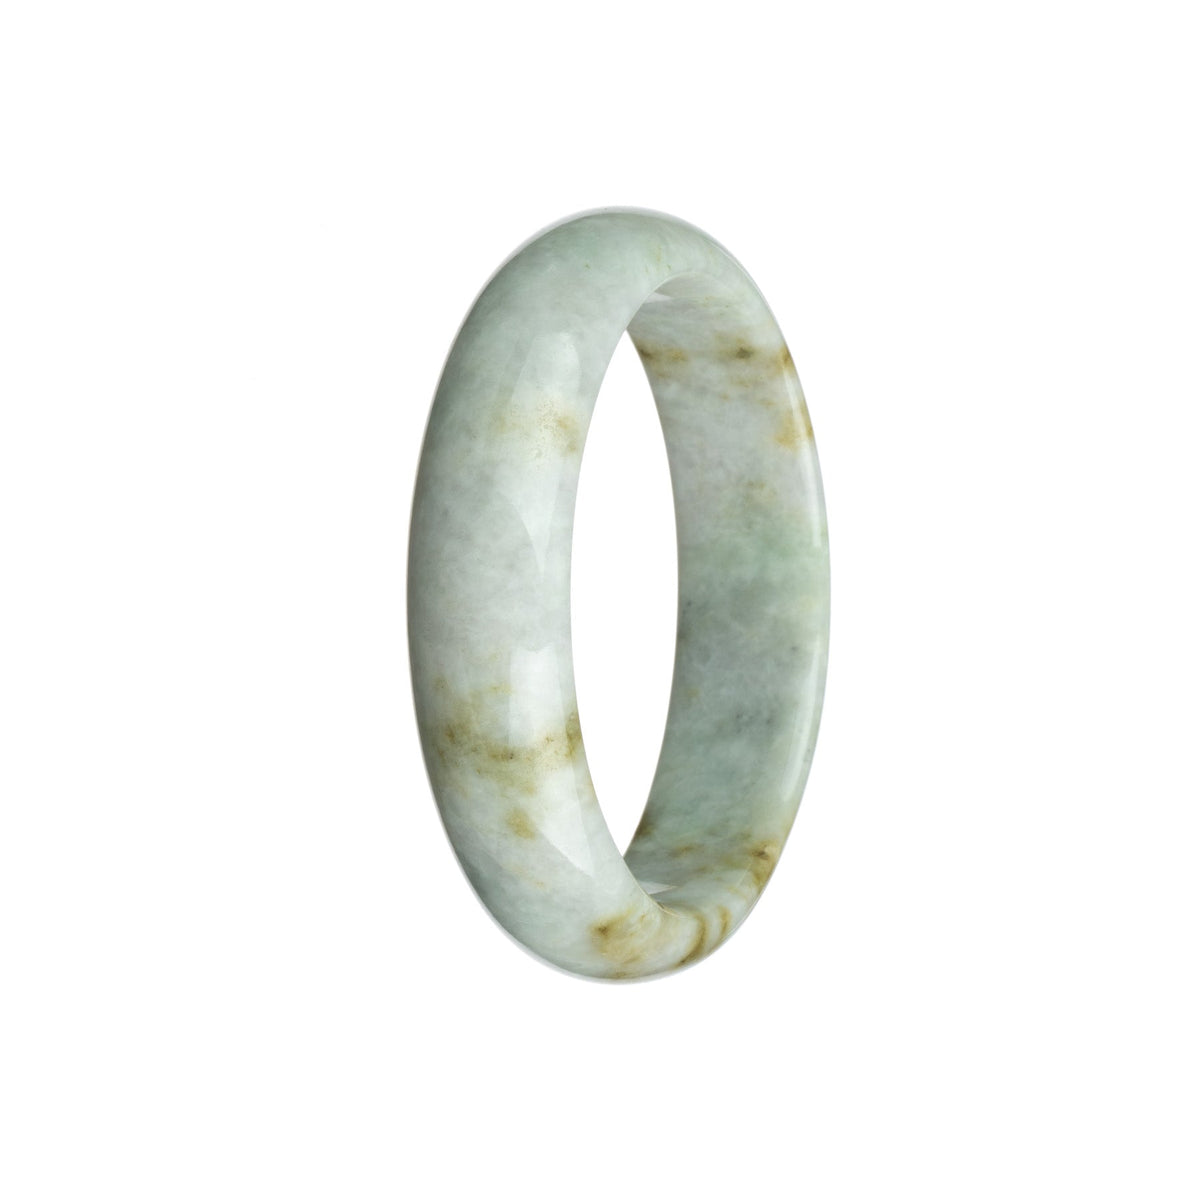 An elegant traditional jade bracelet with a certified untreated white stone featuring a beautiful brown pattern, shaped like a 58mm half moon.